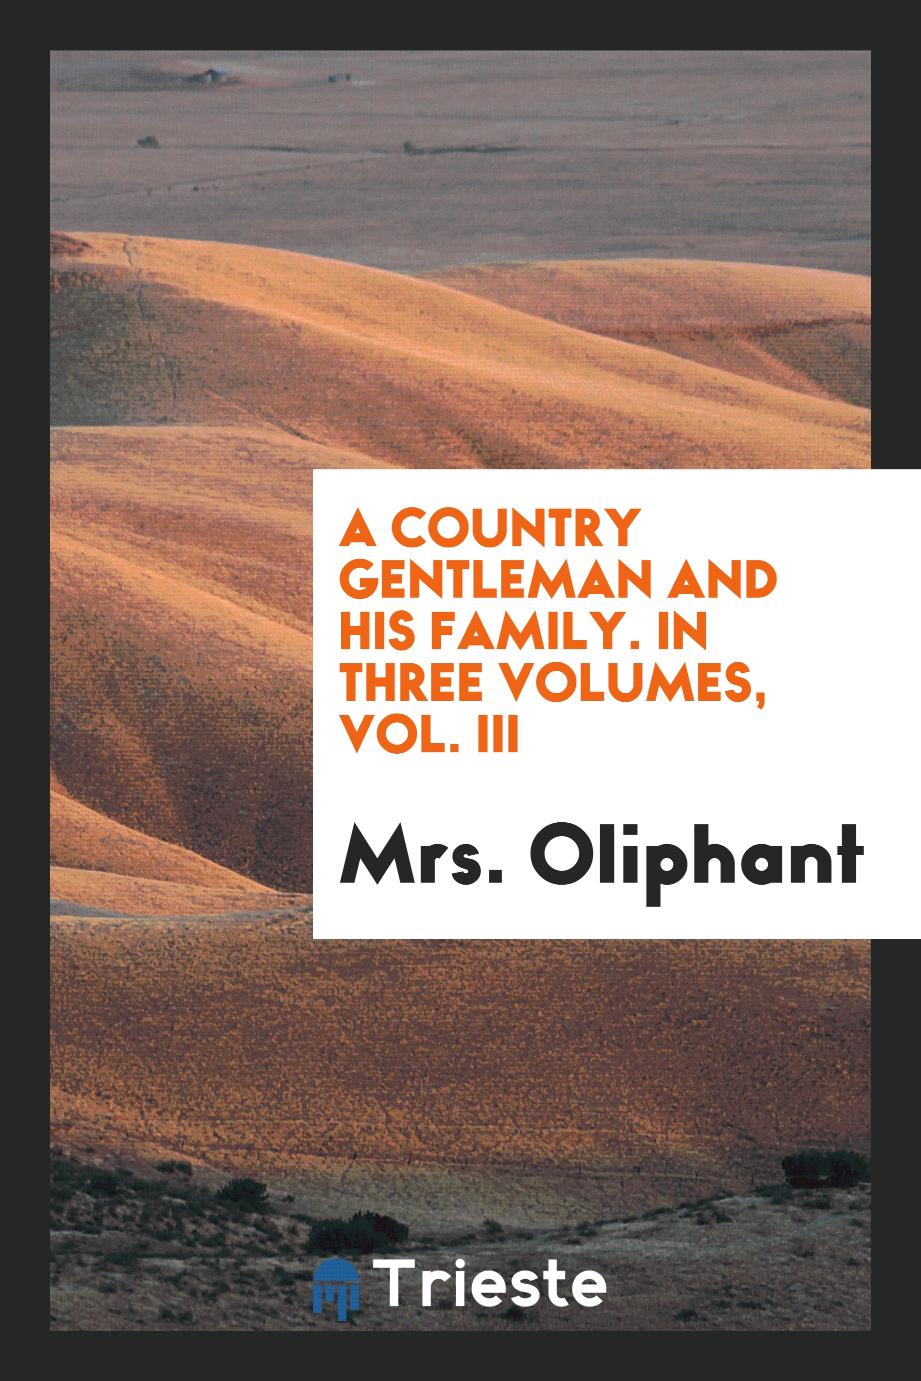 A country gentleman and his family. In three volumes, Vol. III